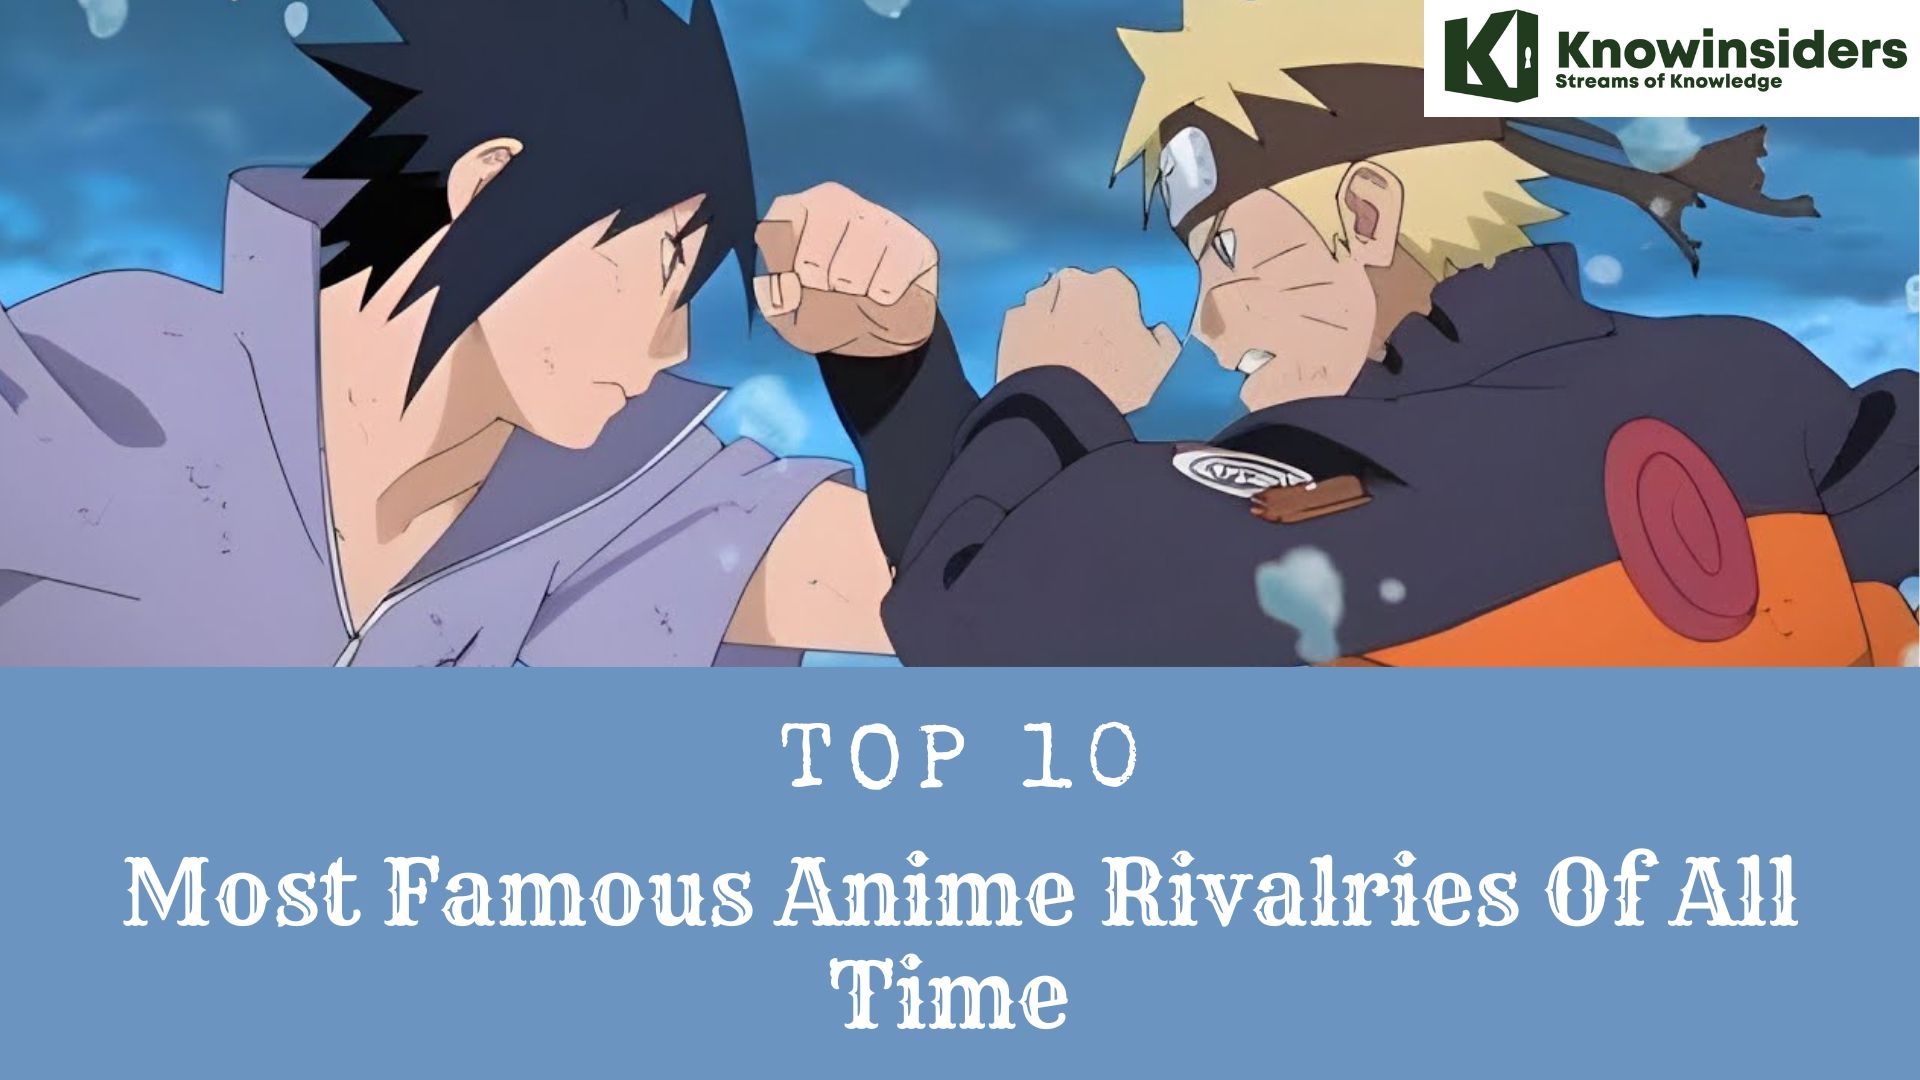 Top 10 Most Famous Anime Rivalries Of All Time  Knowinsiders.com 